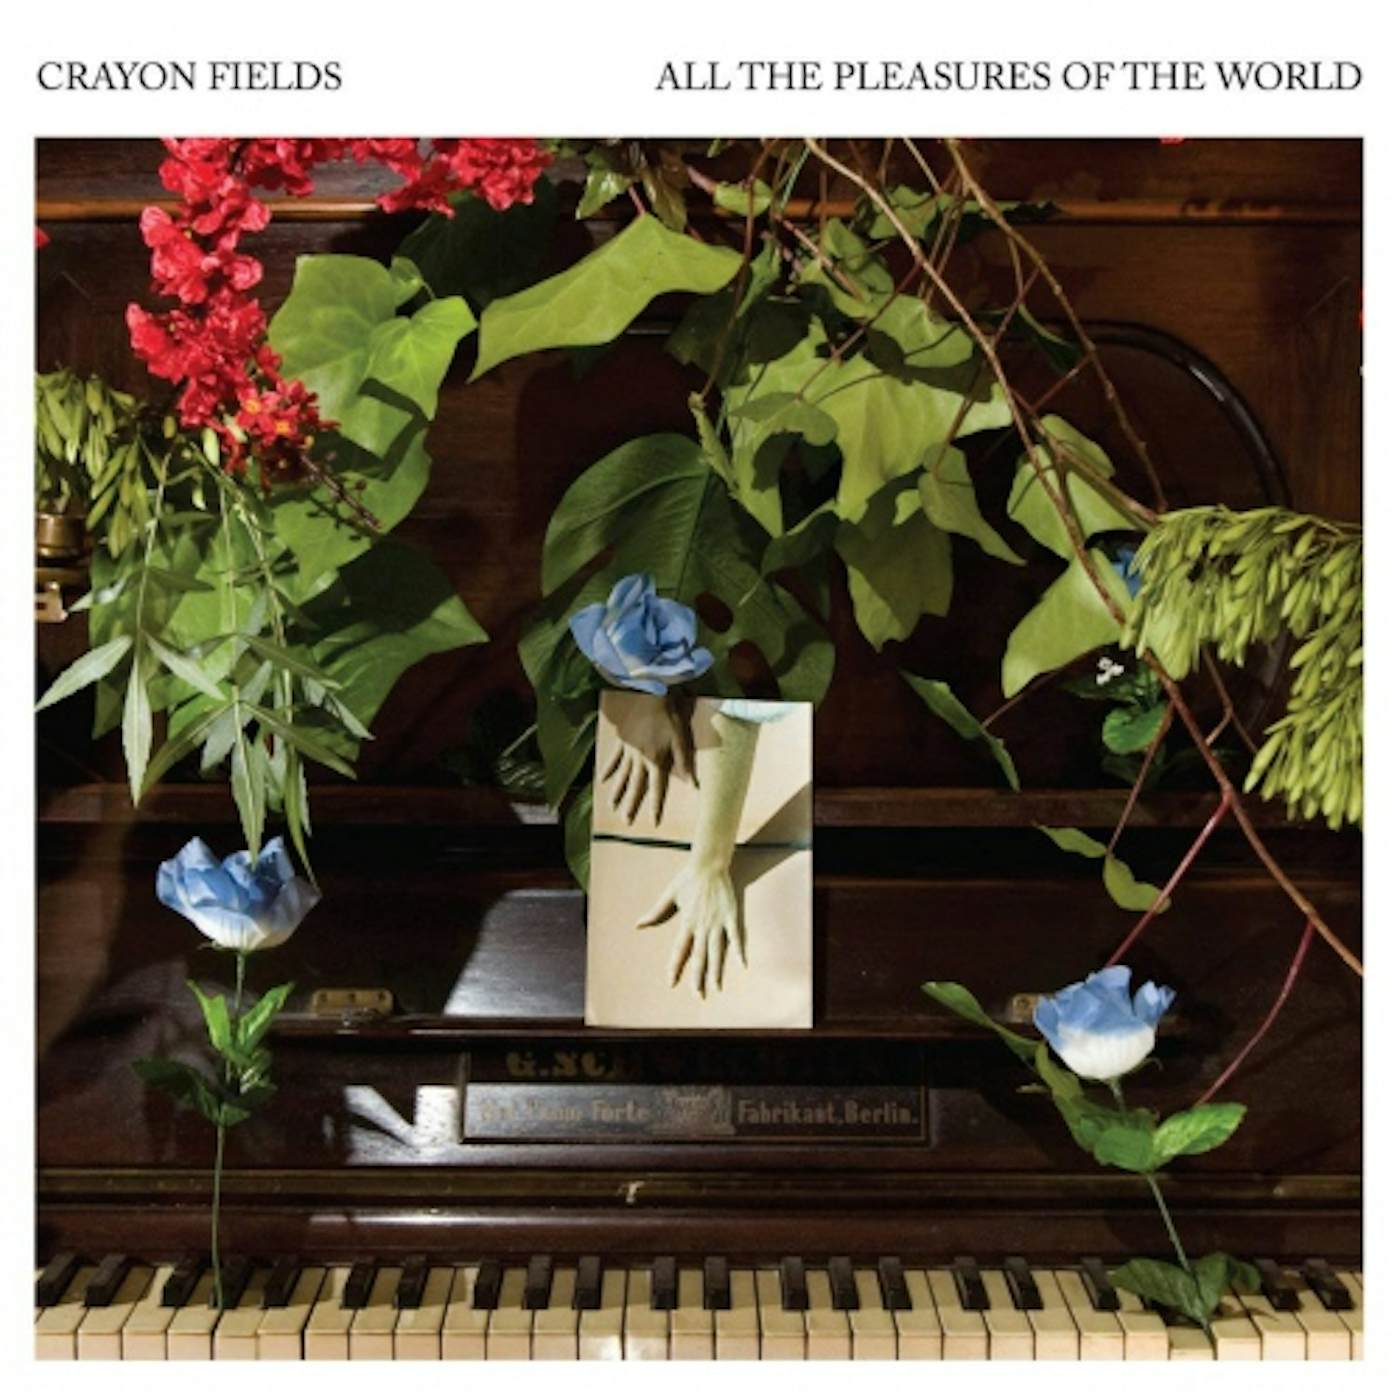 The Crayon Fields ALL THE PLEASURES OF THE WORLD (DELUXE EDITION) (C Vinyl Record